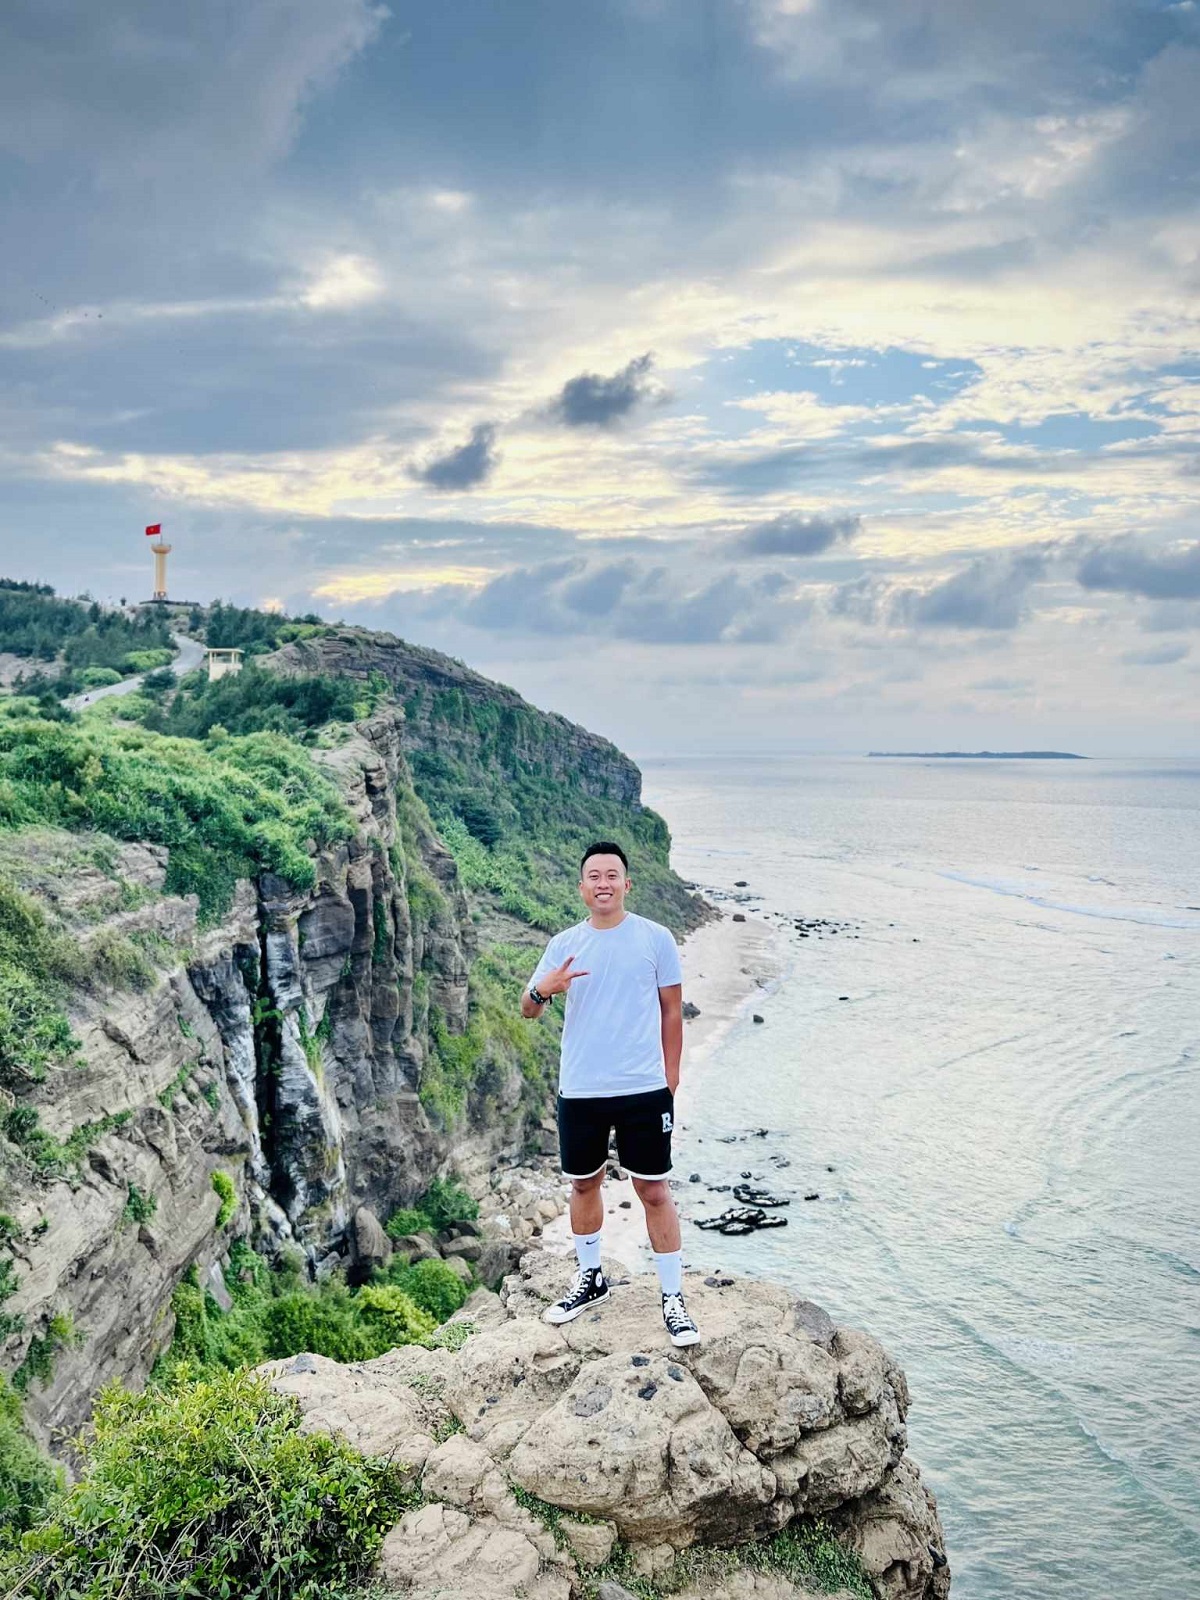 Phuoc on Binh Dinh beach.  Photo: Provided by the character